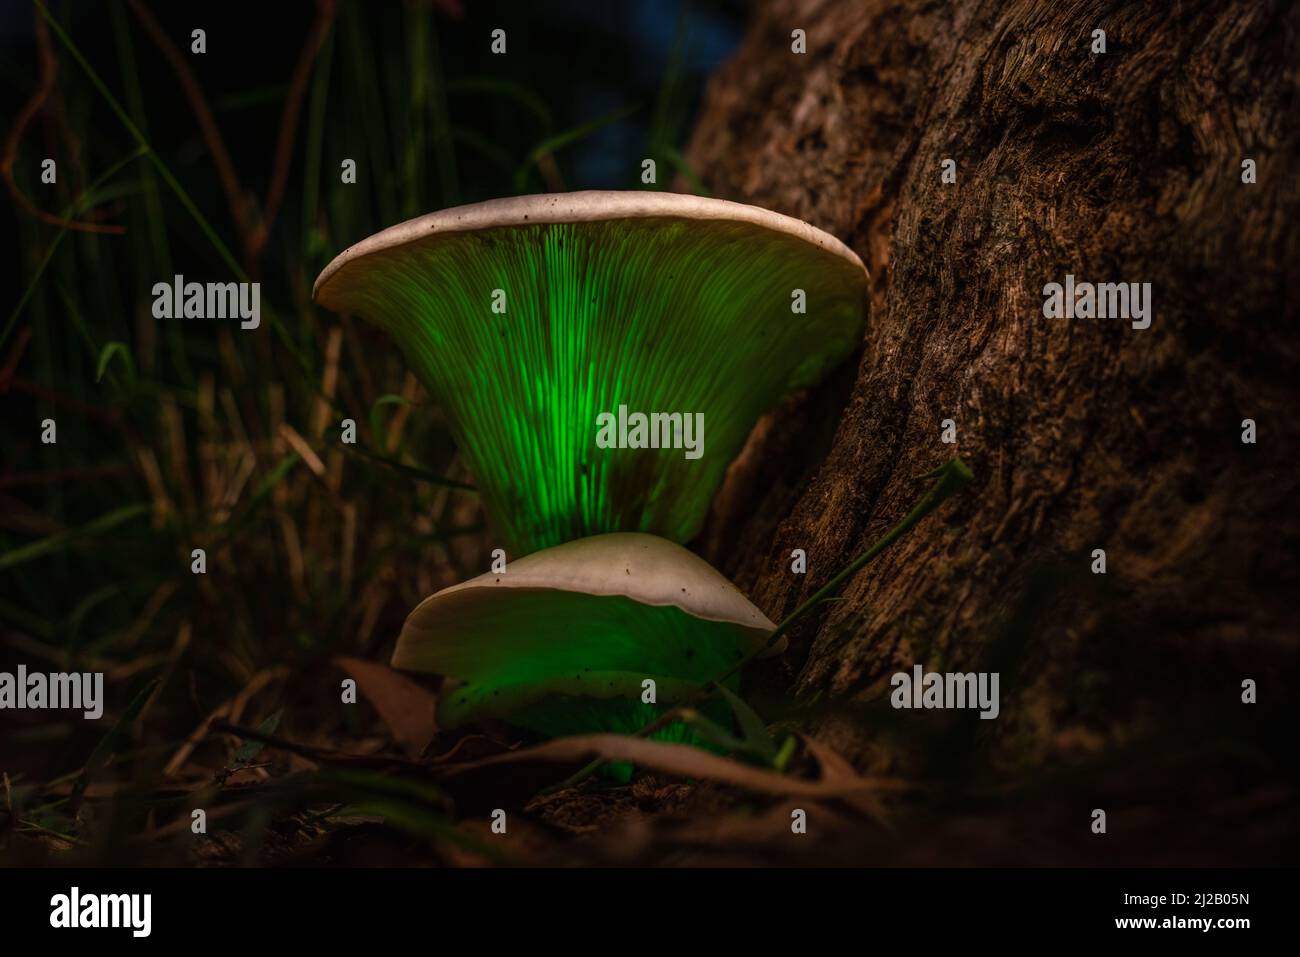 The Ghost Mushroom (Omphalotus nidiformis) is a bioluminescent fungus that emits a soft green glow at night. Stock Photo